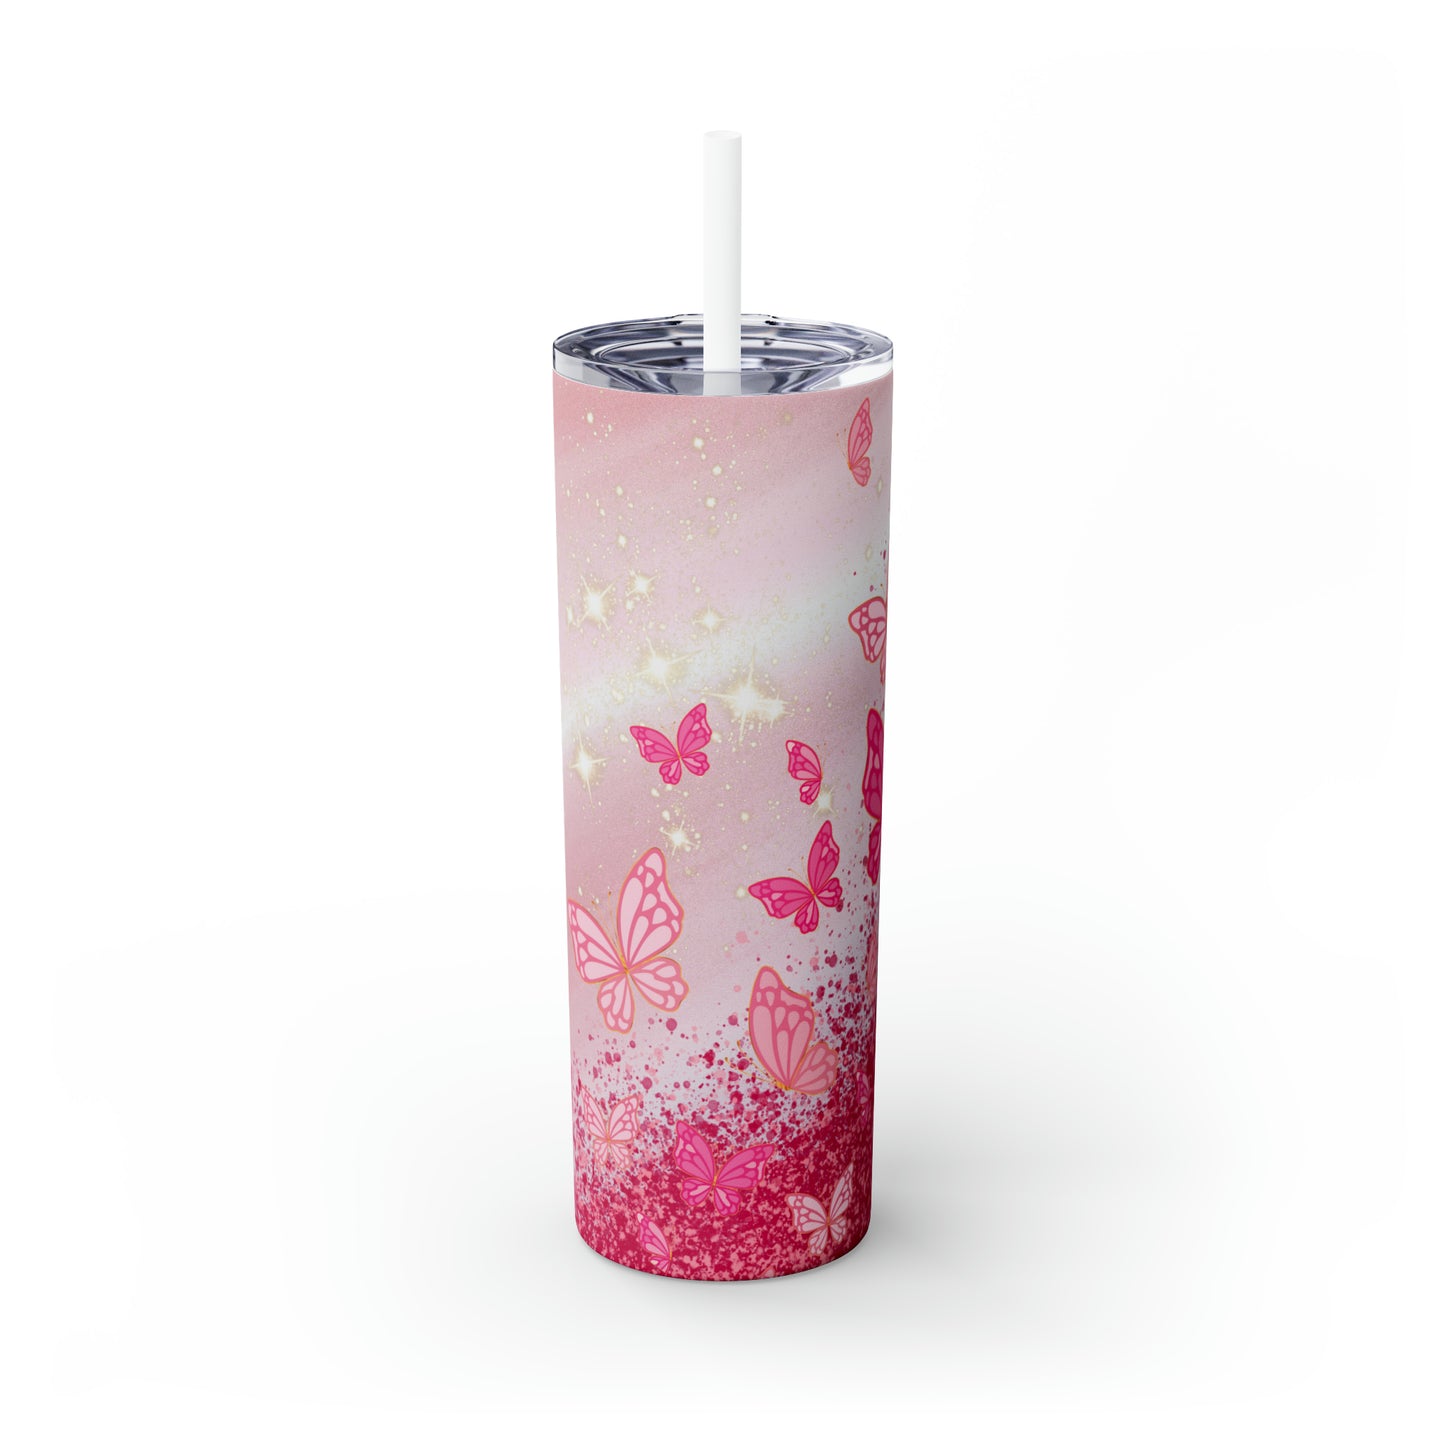 Butterfly Glitter | Pink Skinny Tumbler with Straw, 20oz | Great For Gift Giving | BPA-Free & Non-Toxic